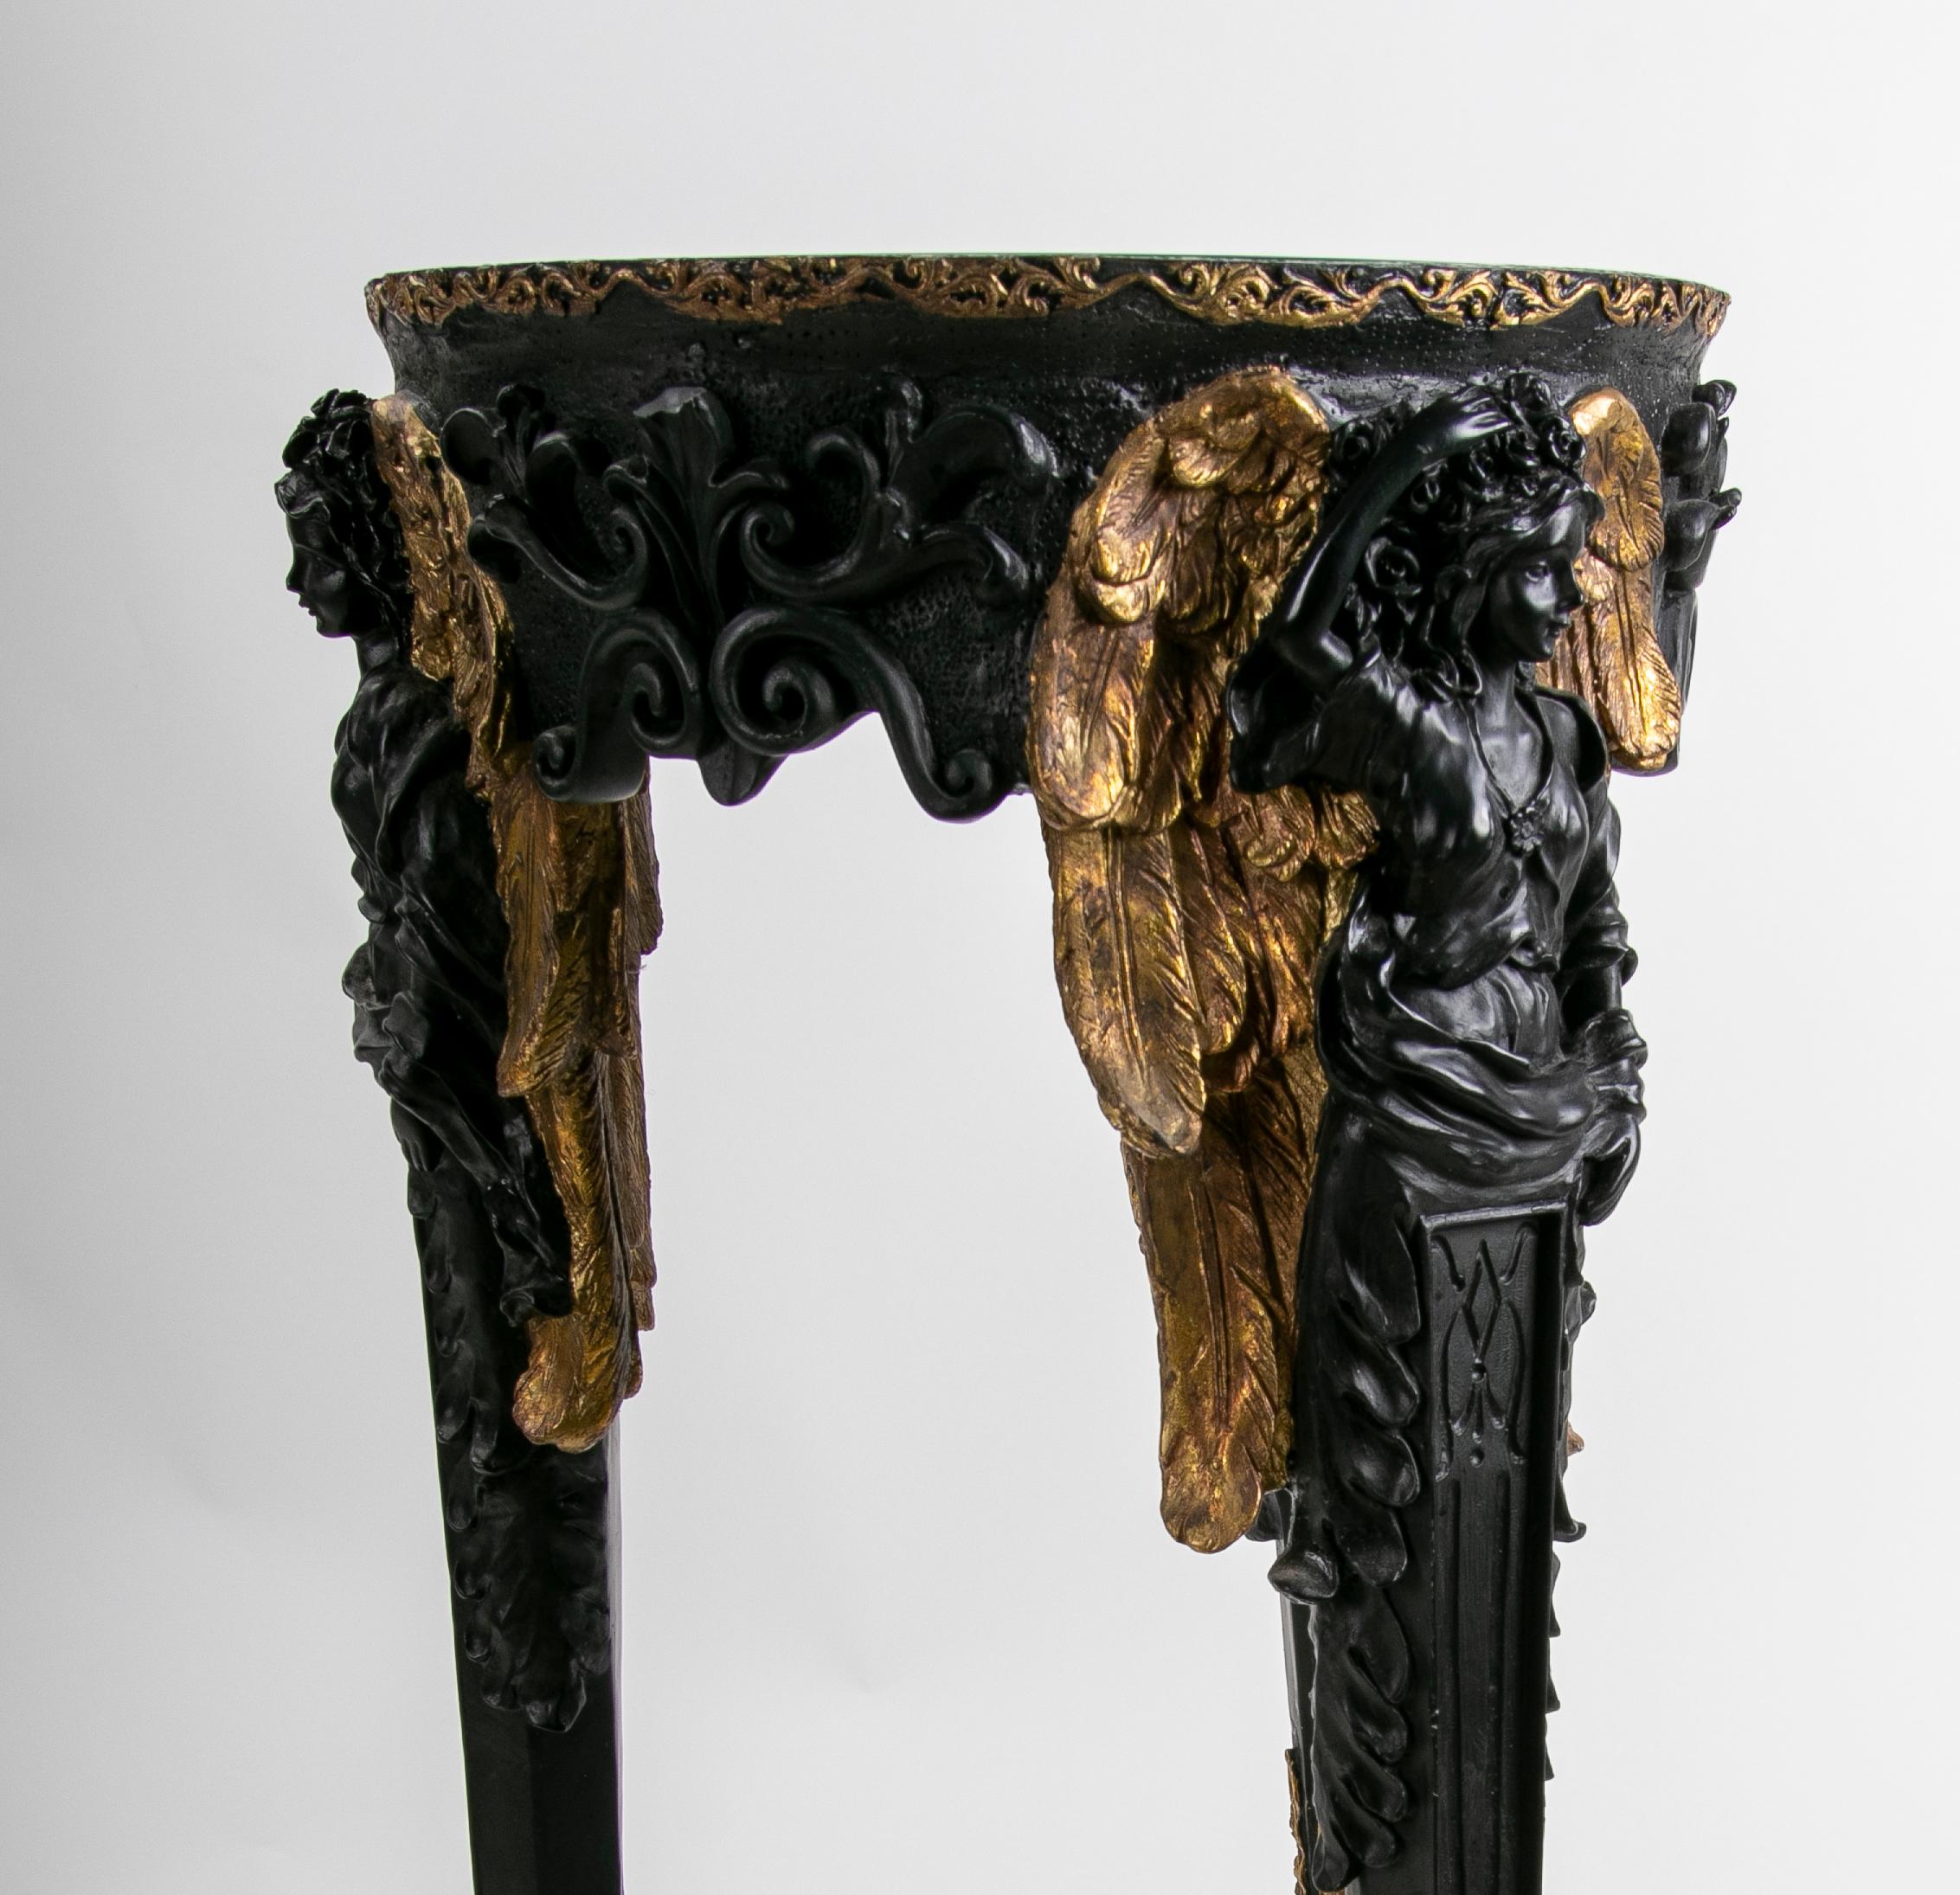 Polychromed Bronze Side Table with Winged Women on the Legs For Sale 9